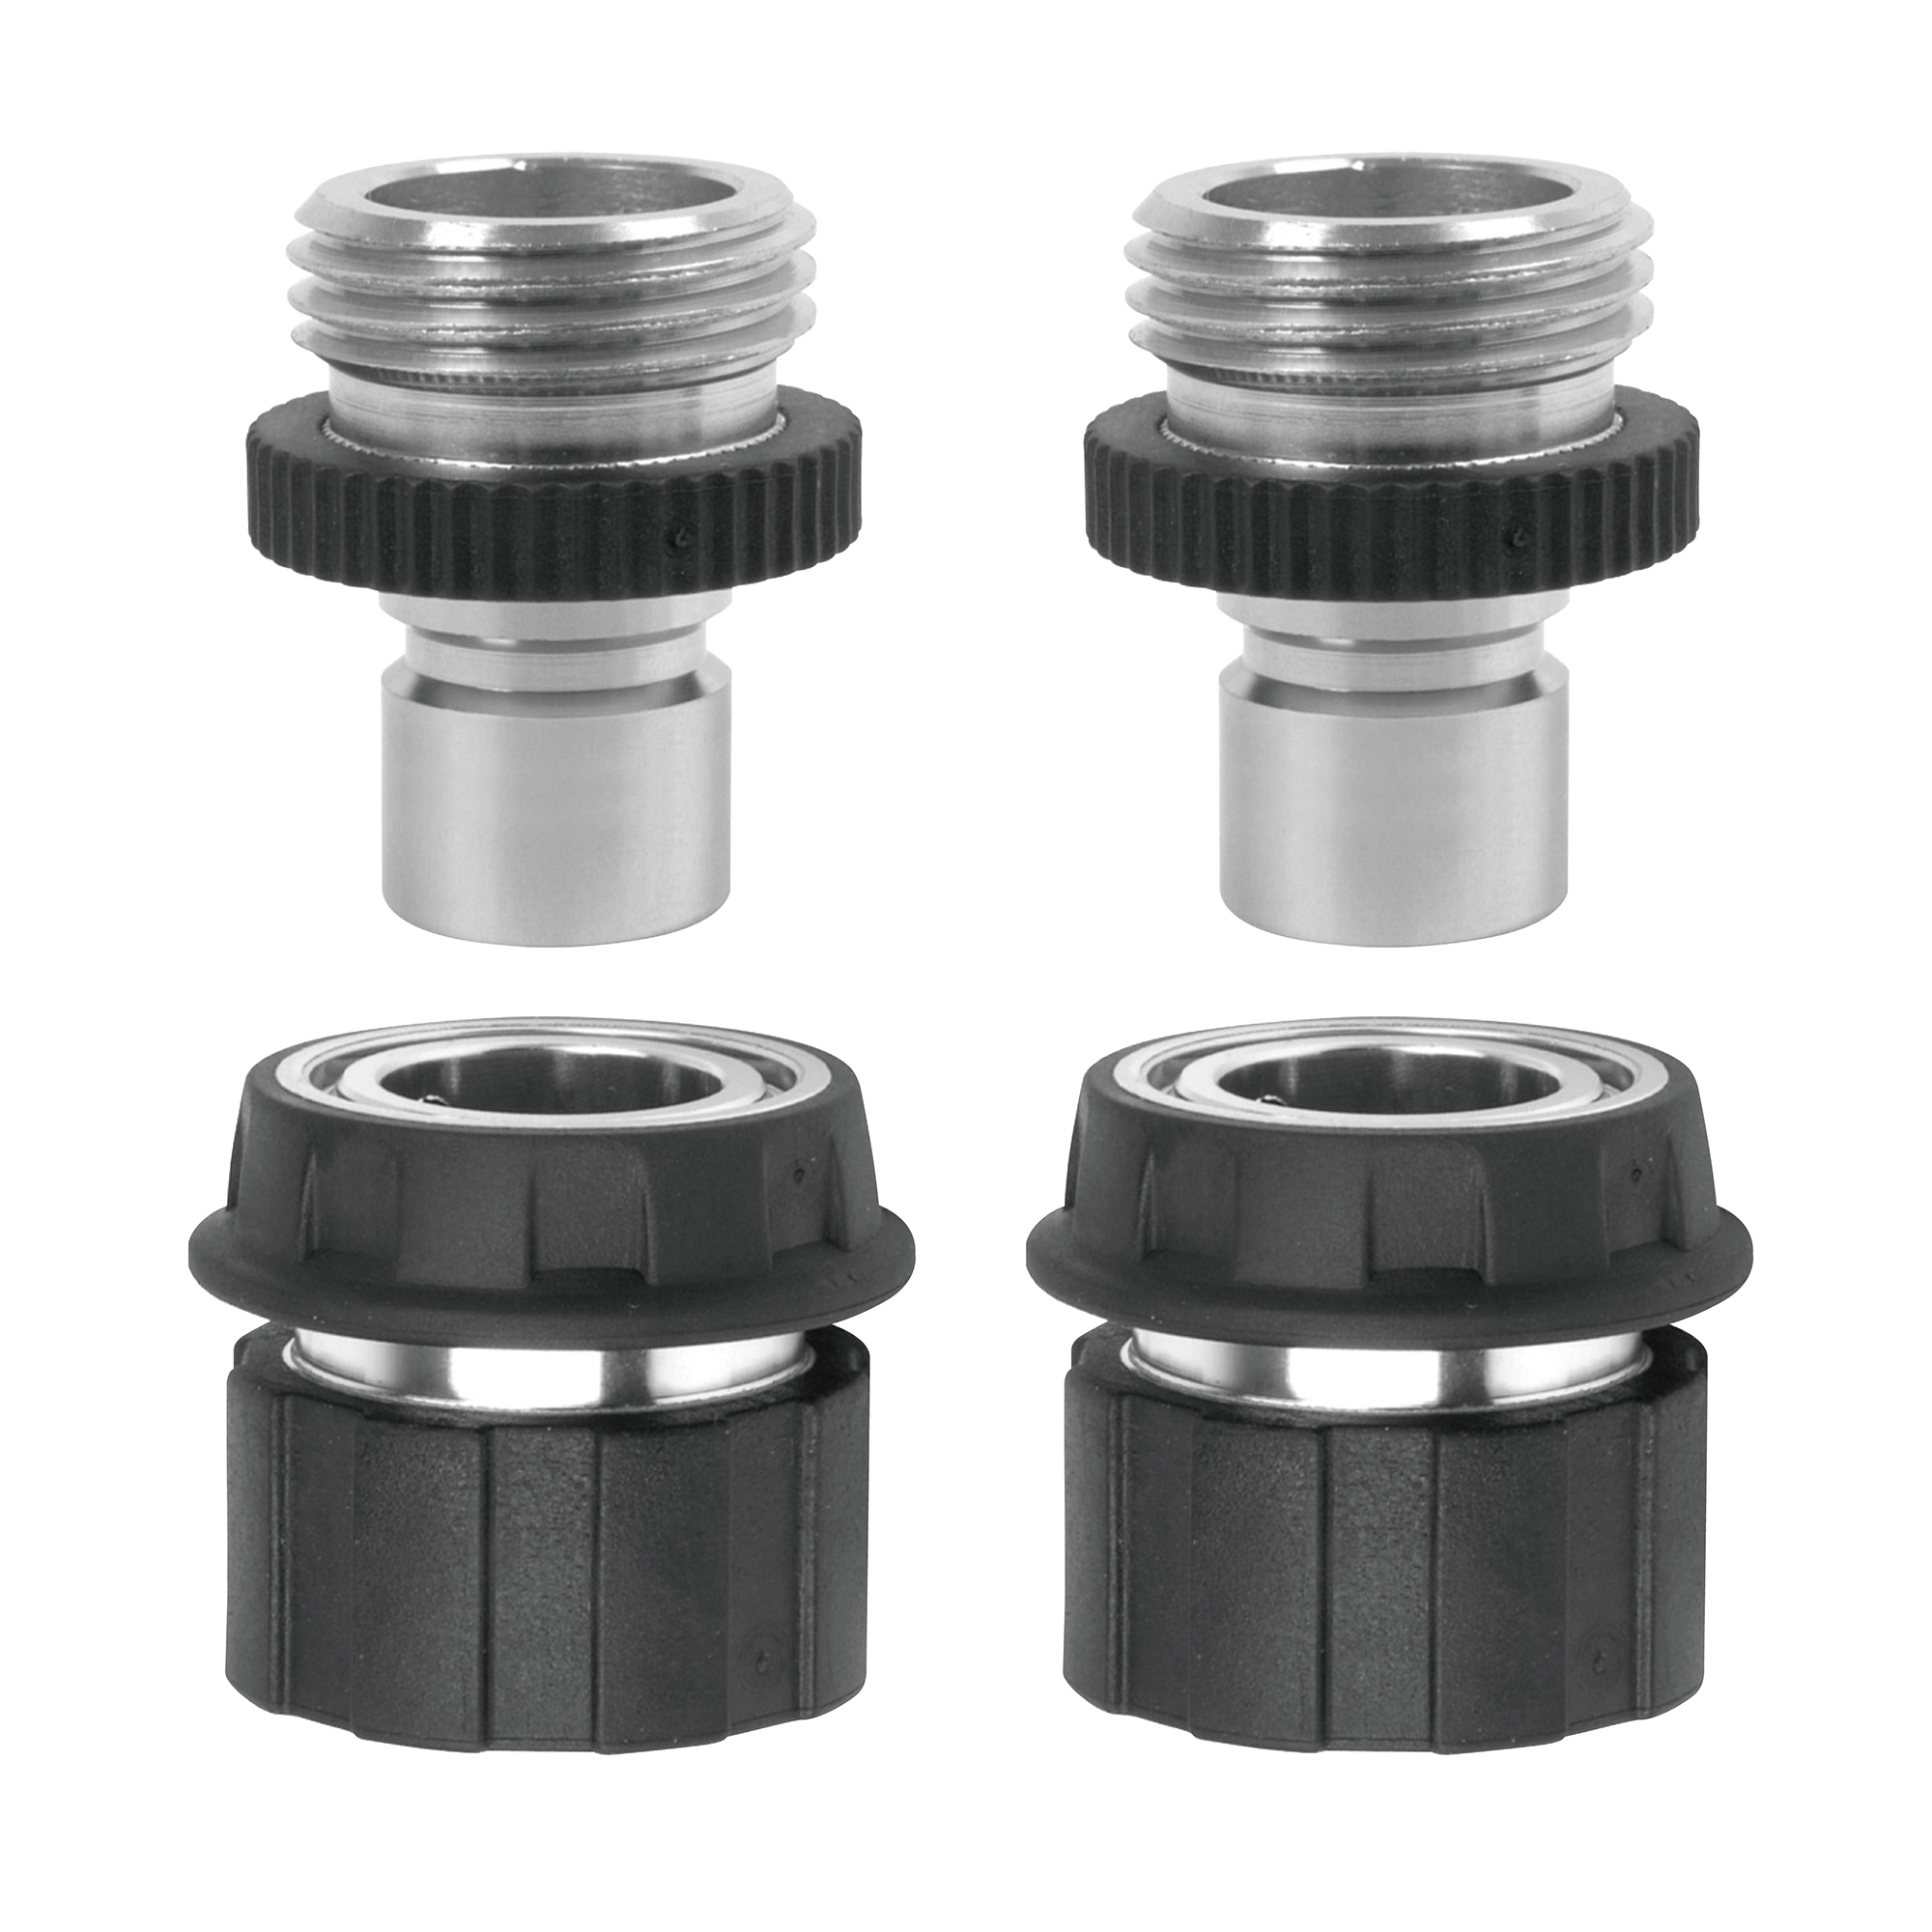 Silver product adapters and product end connectors with water stop